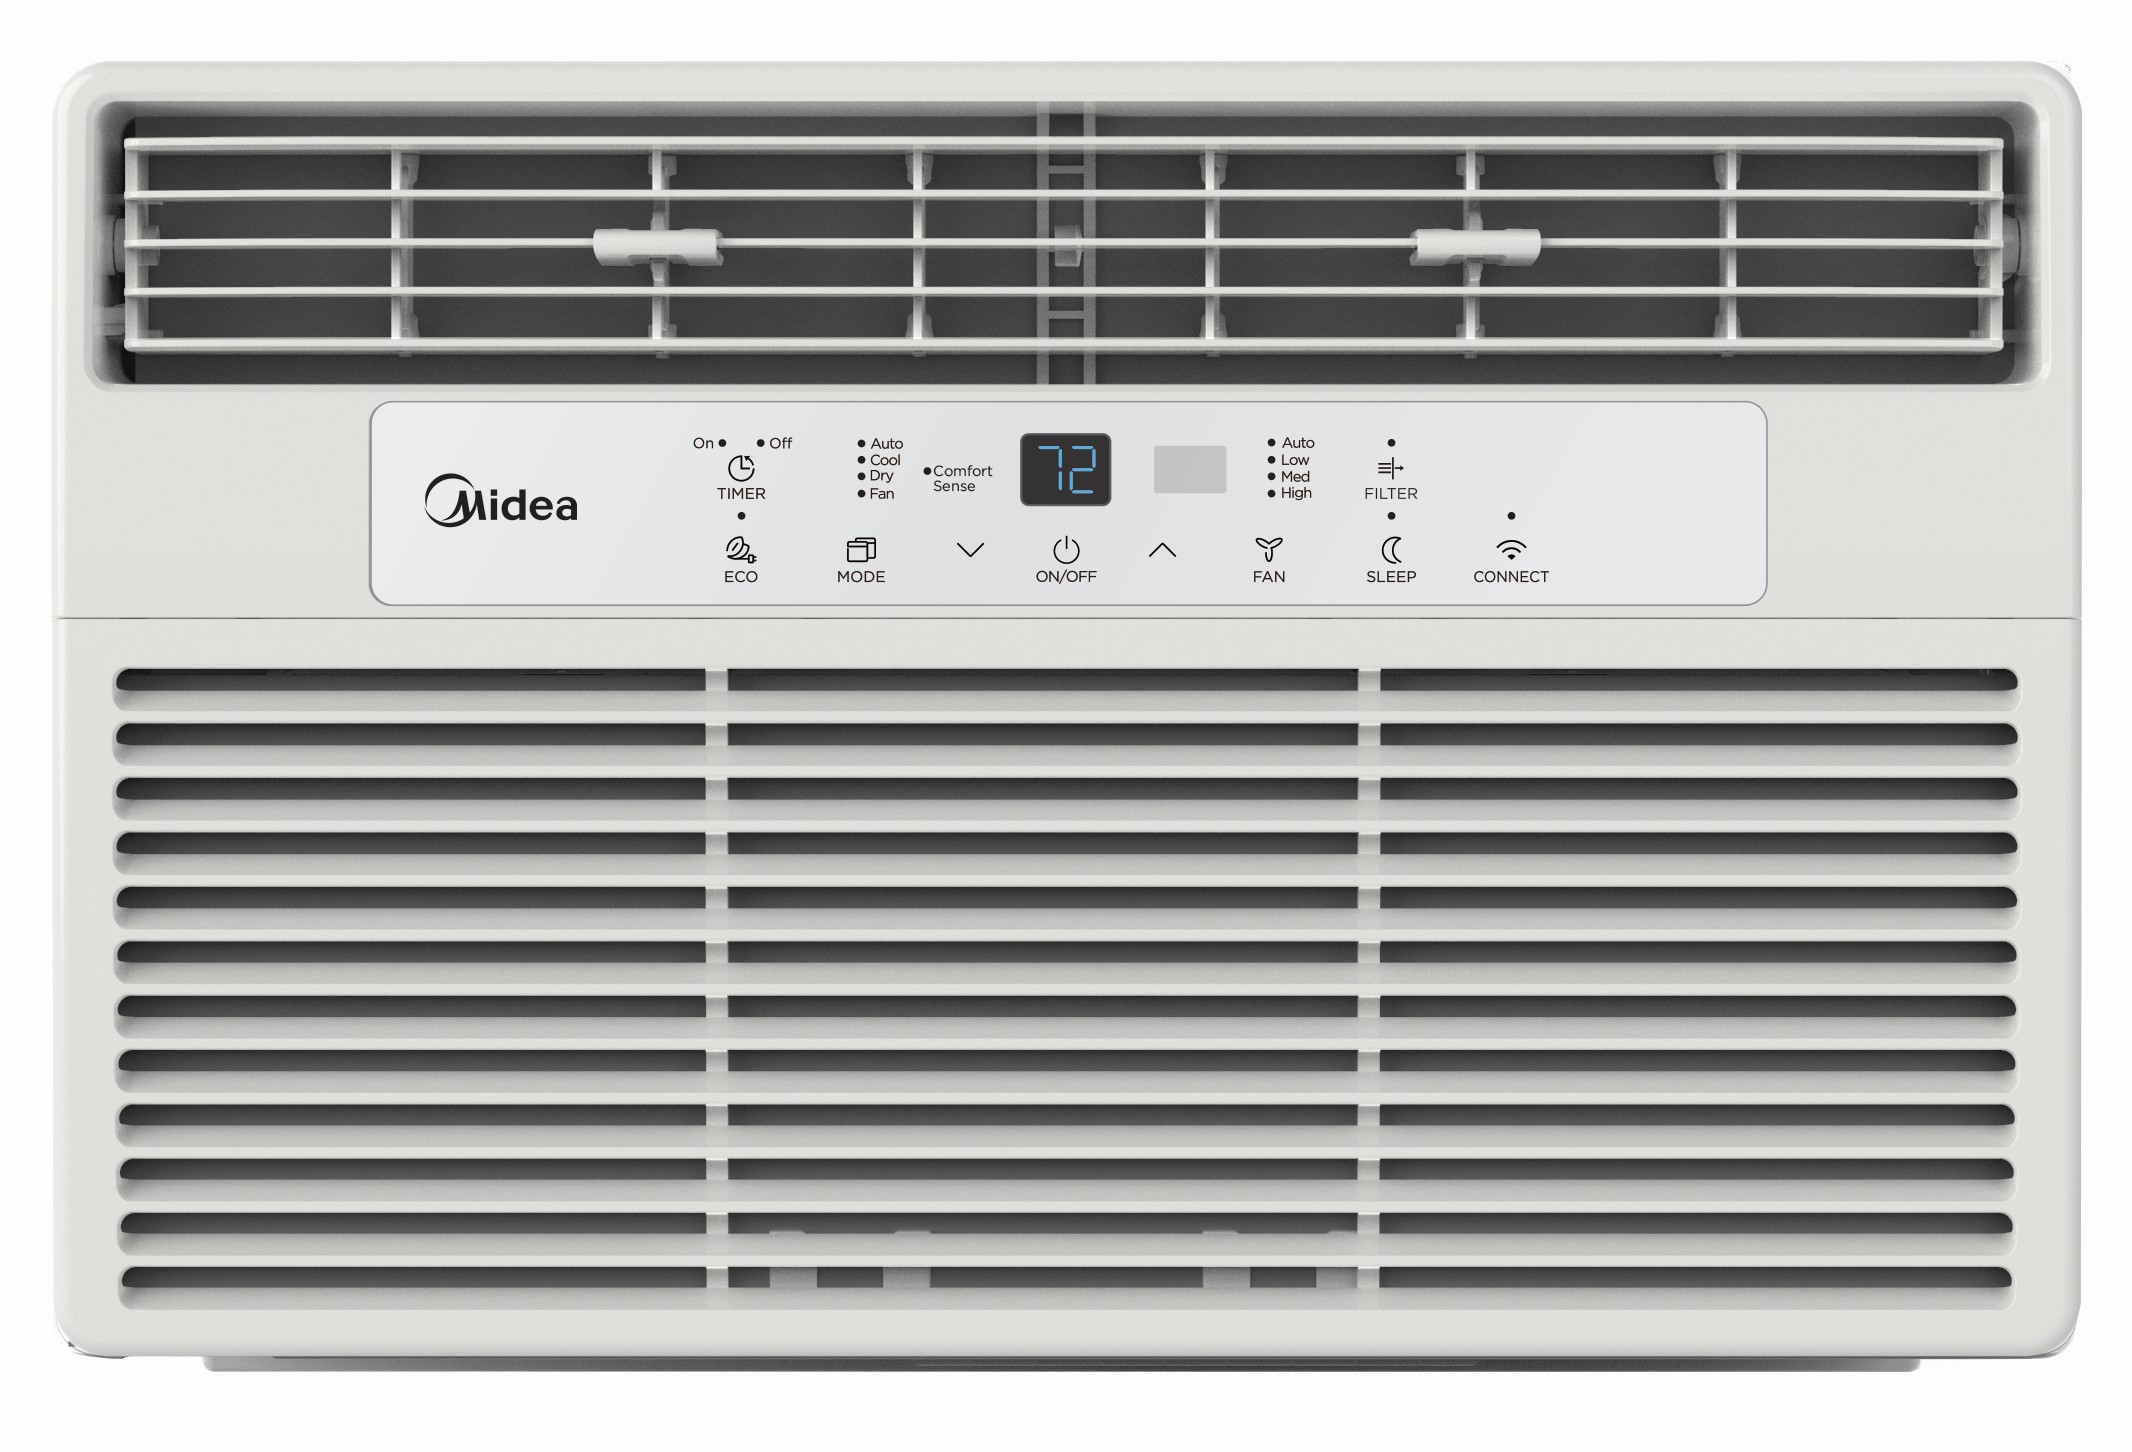 Midea 8,000 BTU 115V Smart Window Air Conditioner with Comfort Sense Remote, Covers up to 350 Sq. ft., White, MAW08S1WWT - image 3 of 22